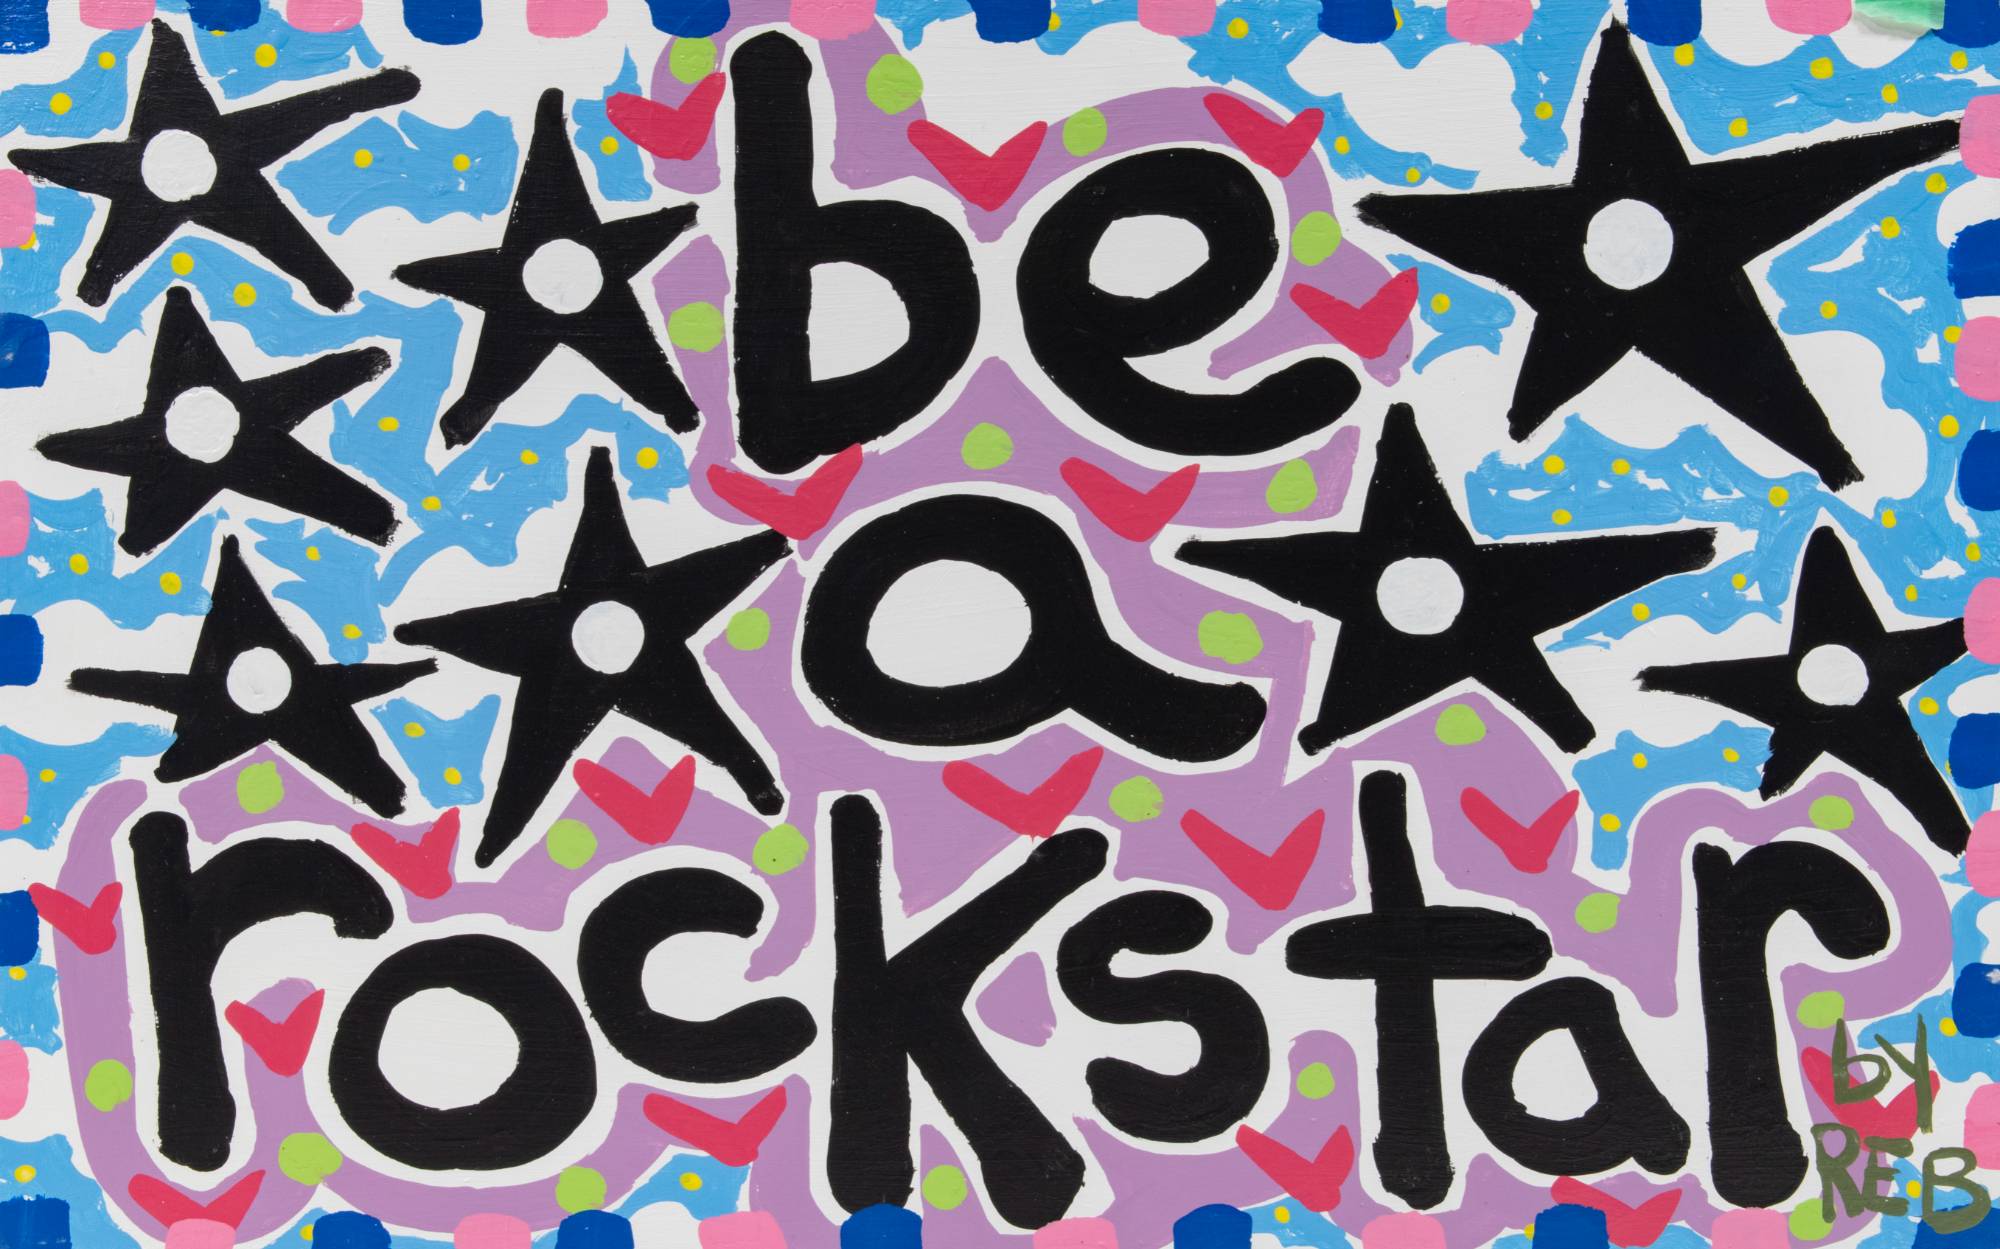 painting of 'be a rockstar today'